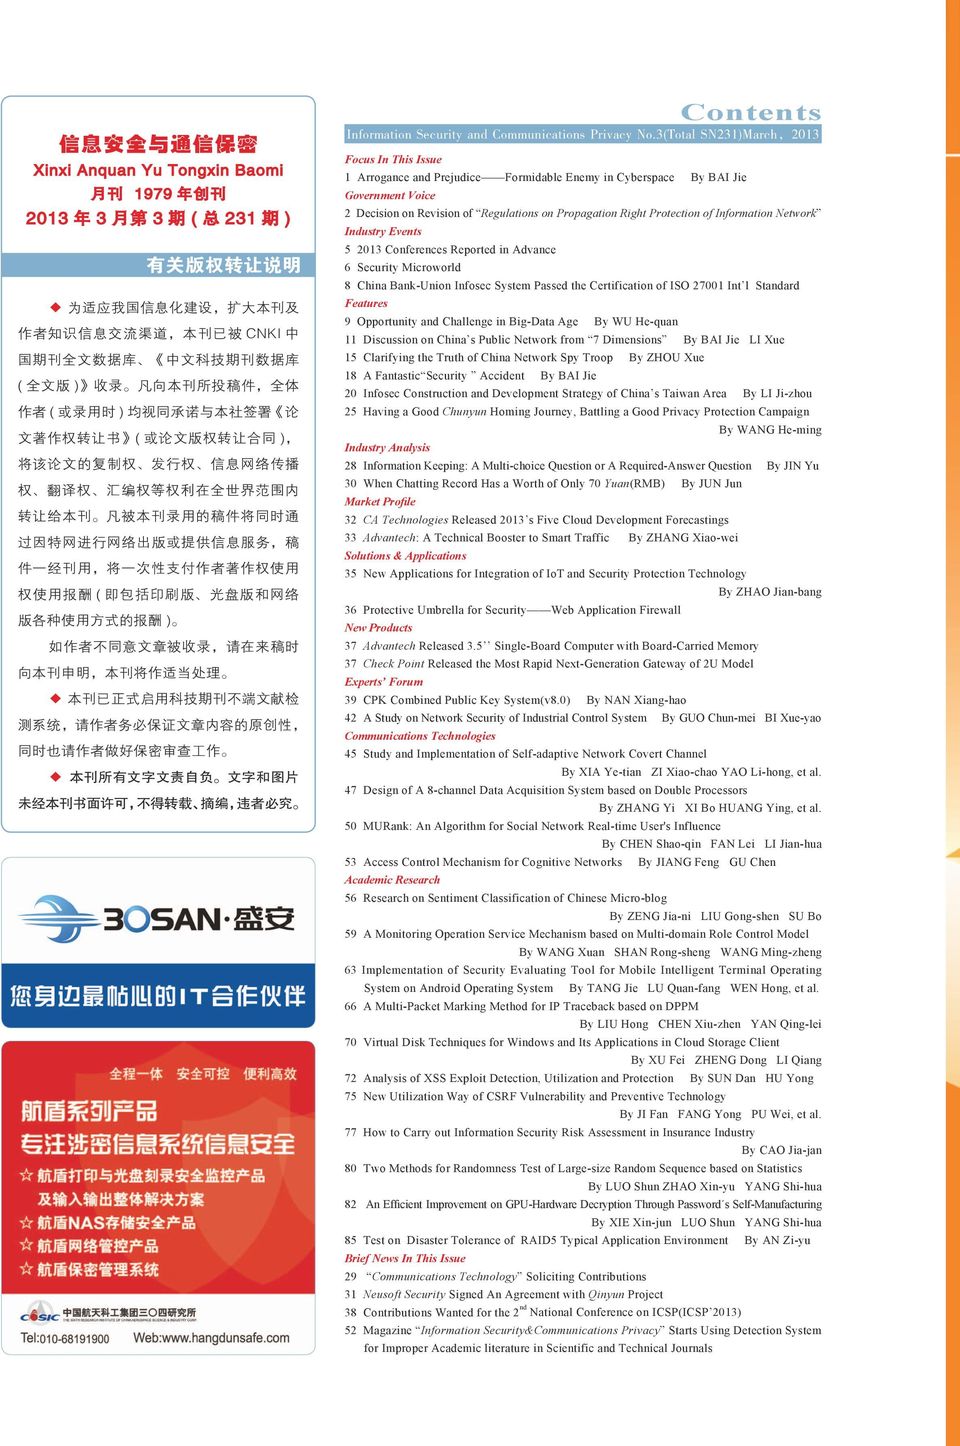 of Information Network Industry Events 5 2013 Conferences Reported in Advance 6 Security Microworld 8 China Bank-Union Infosec System Passed the Certification of ISO 27001 Int l Standard 为适应我国信息化建设